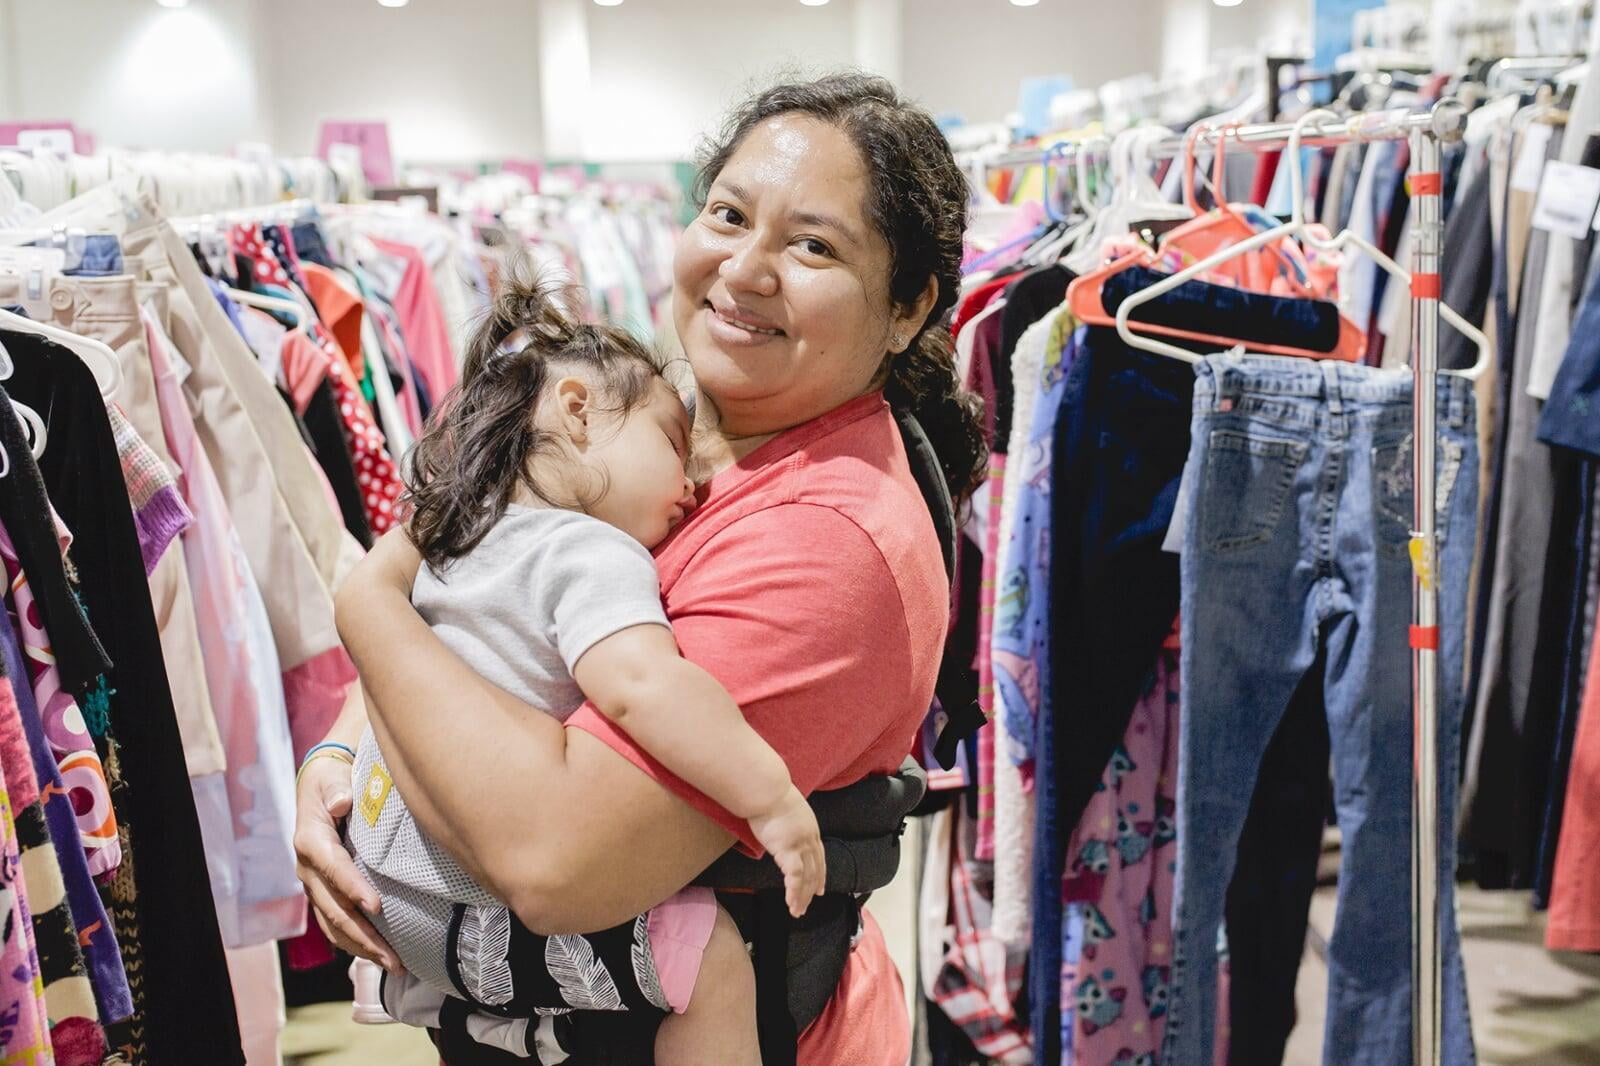 A mother is smiling while holding her sleeping toddler as she browses the racks at her JBF sale.